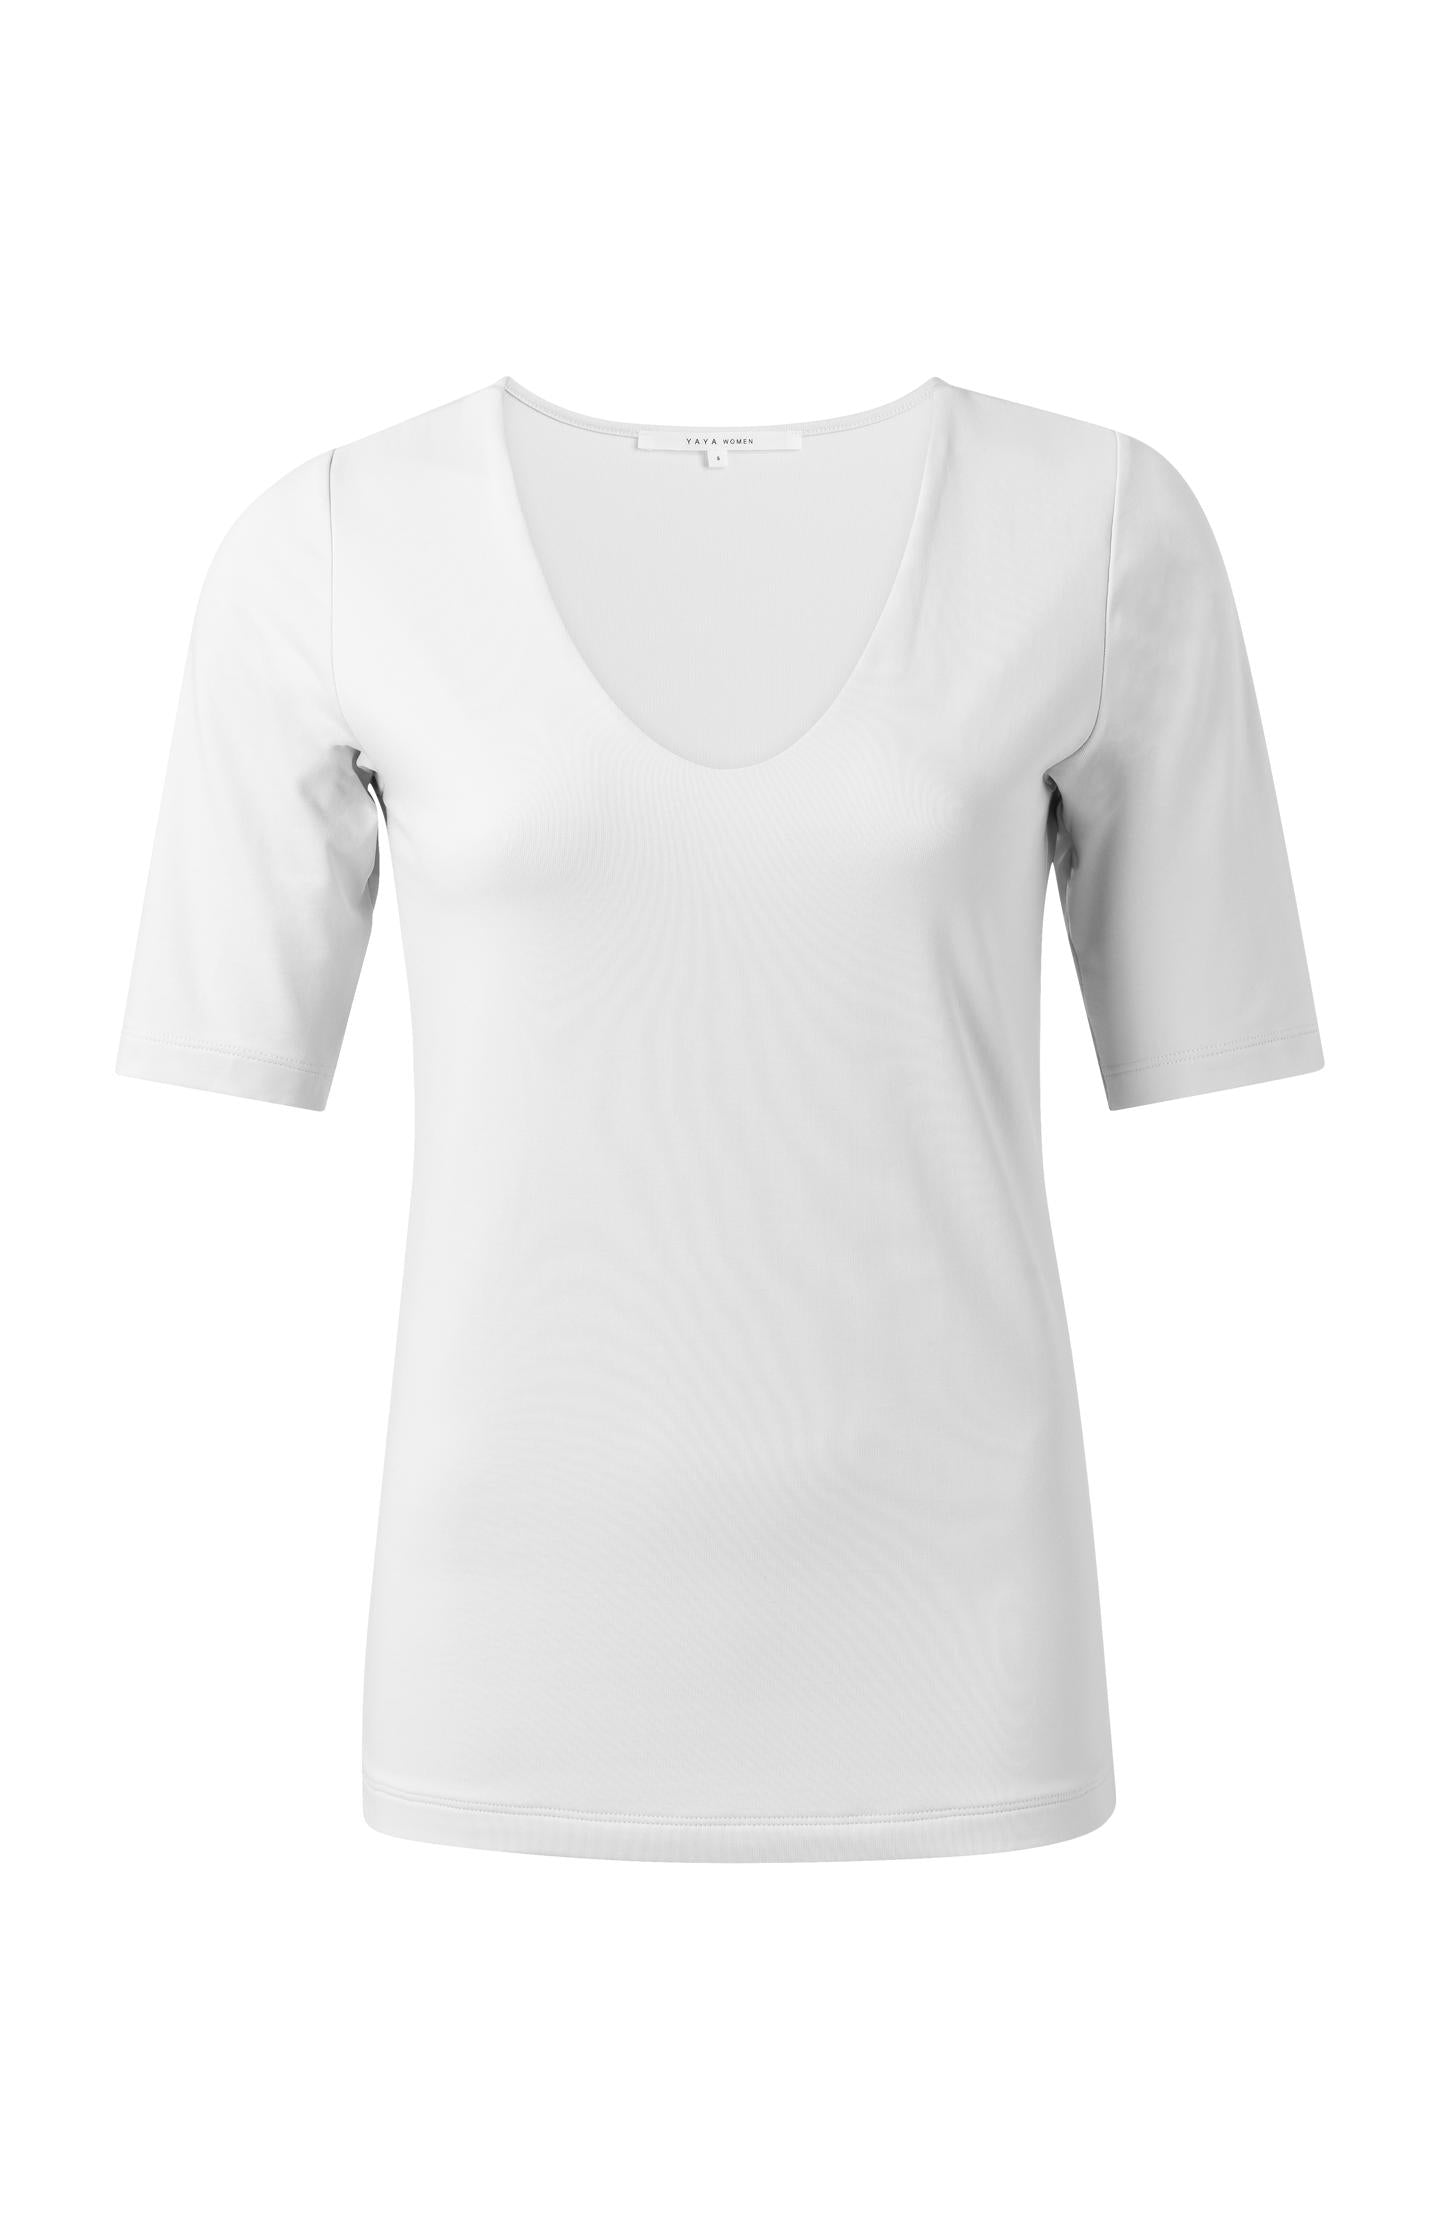 Round V-neck top with half sleeves - Type: product